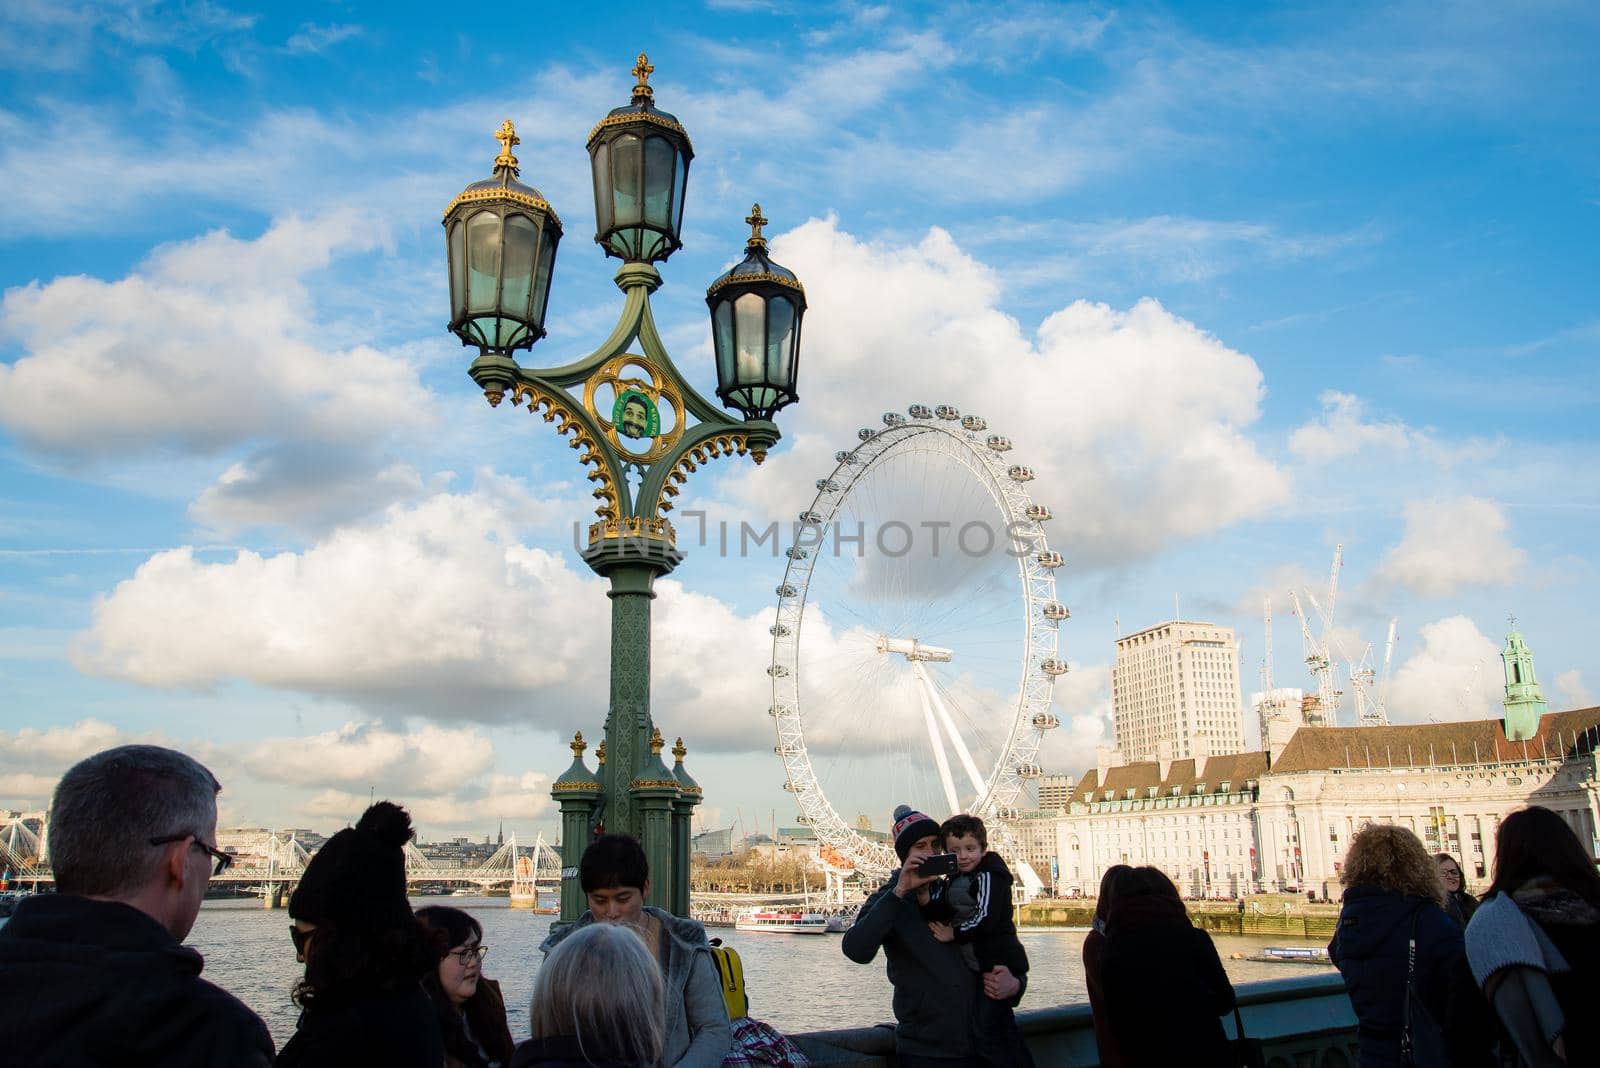 London, UK - February 4, 2017: View of tourists from the back looking out at the London Eye on a gorgeous day with blue skies and big puffy clouds.